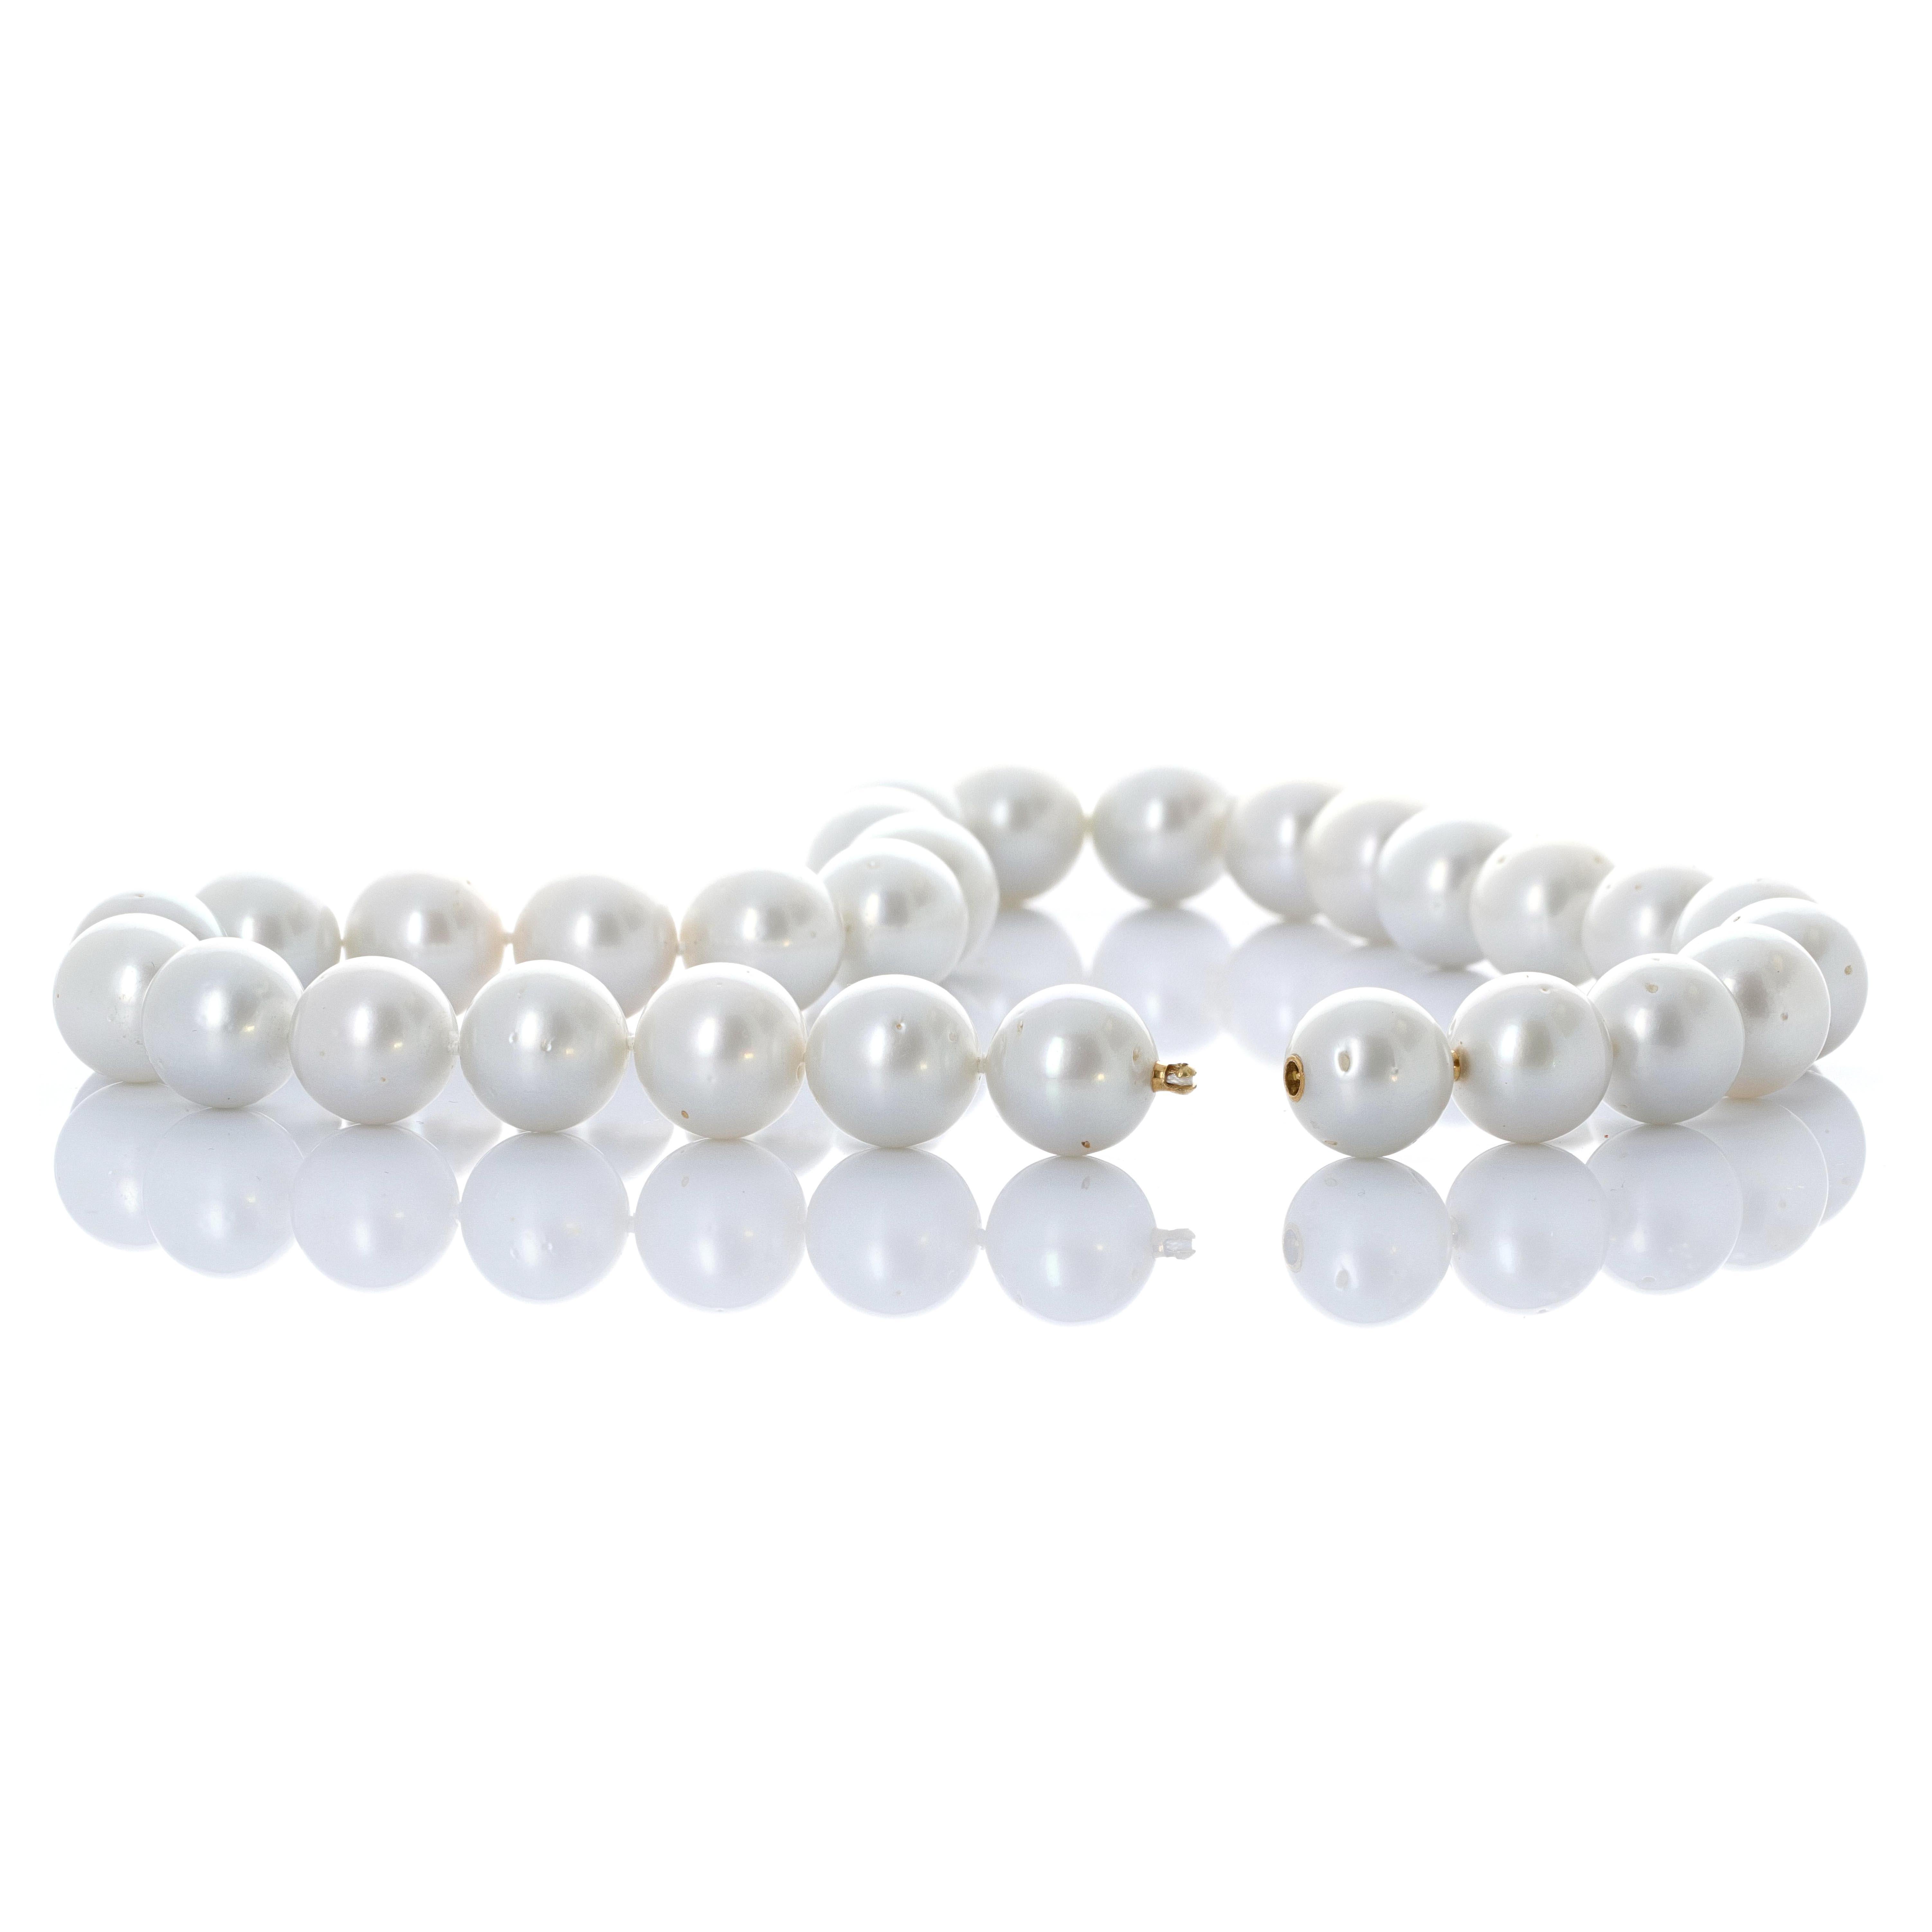 Modern White South Sea Pearl Necklace with Hidden Closure